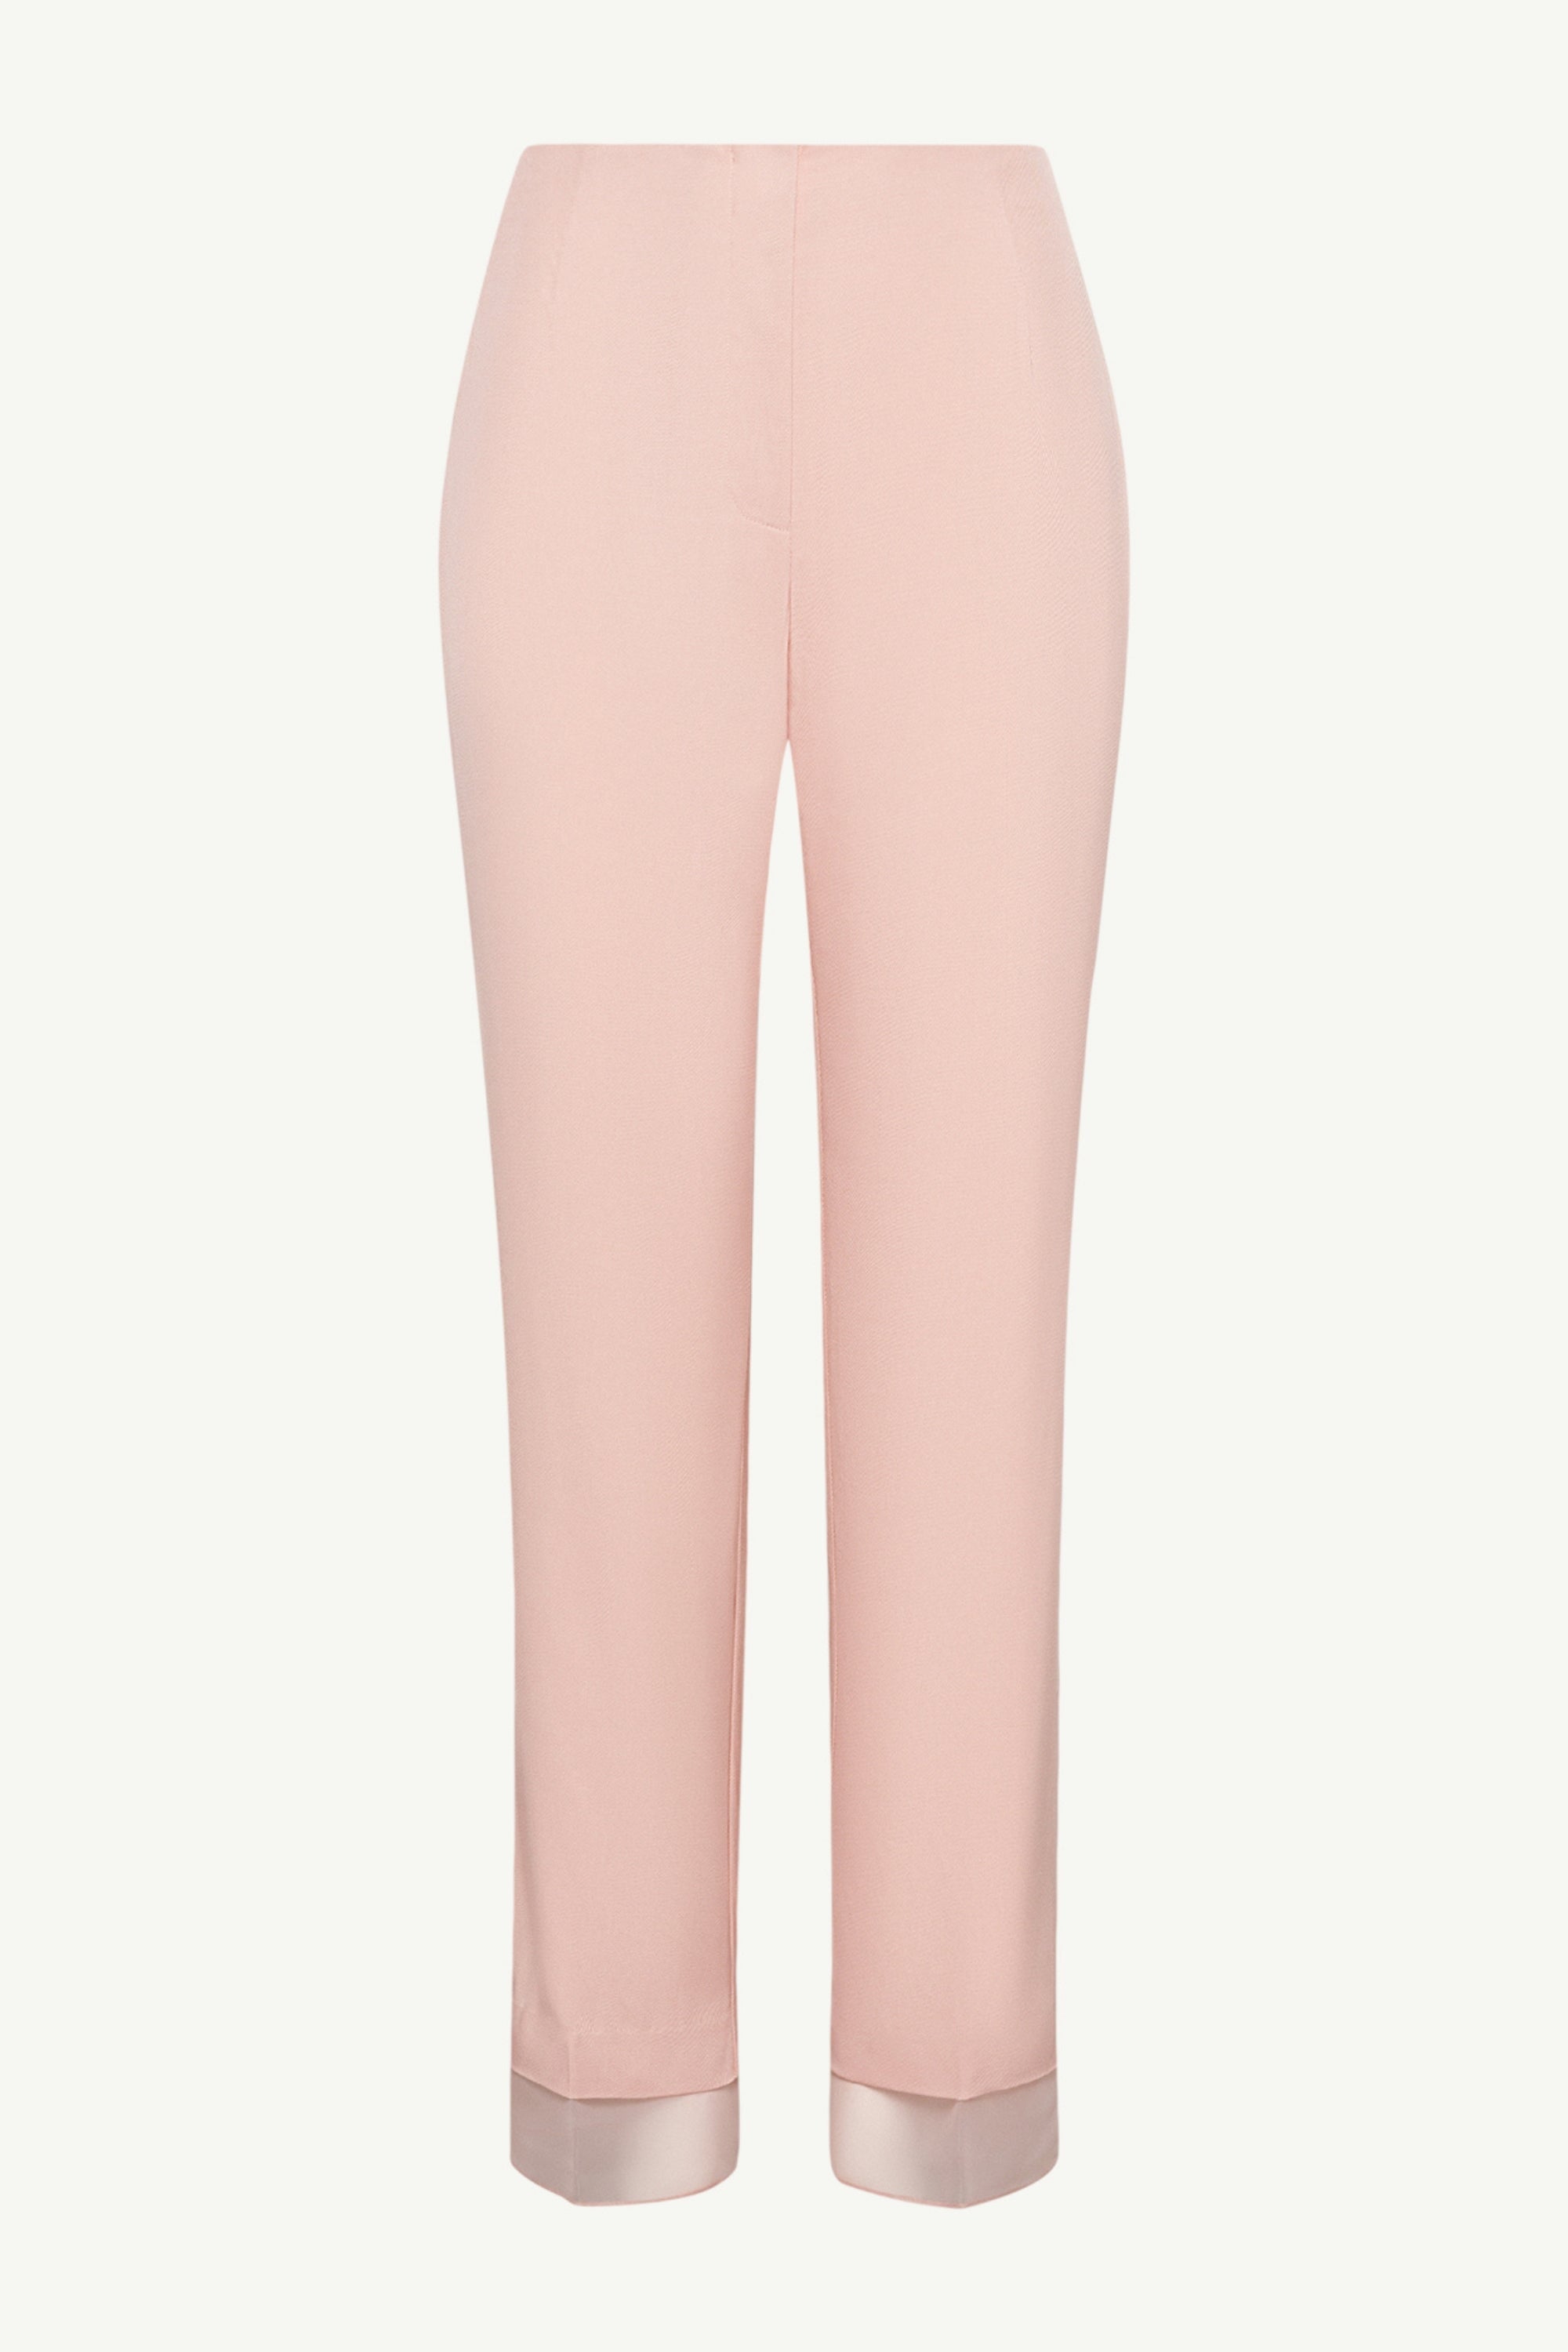 Rayan Organza Trim Trousers - Sepia Rose Clothing epschoolboard 